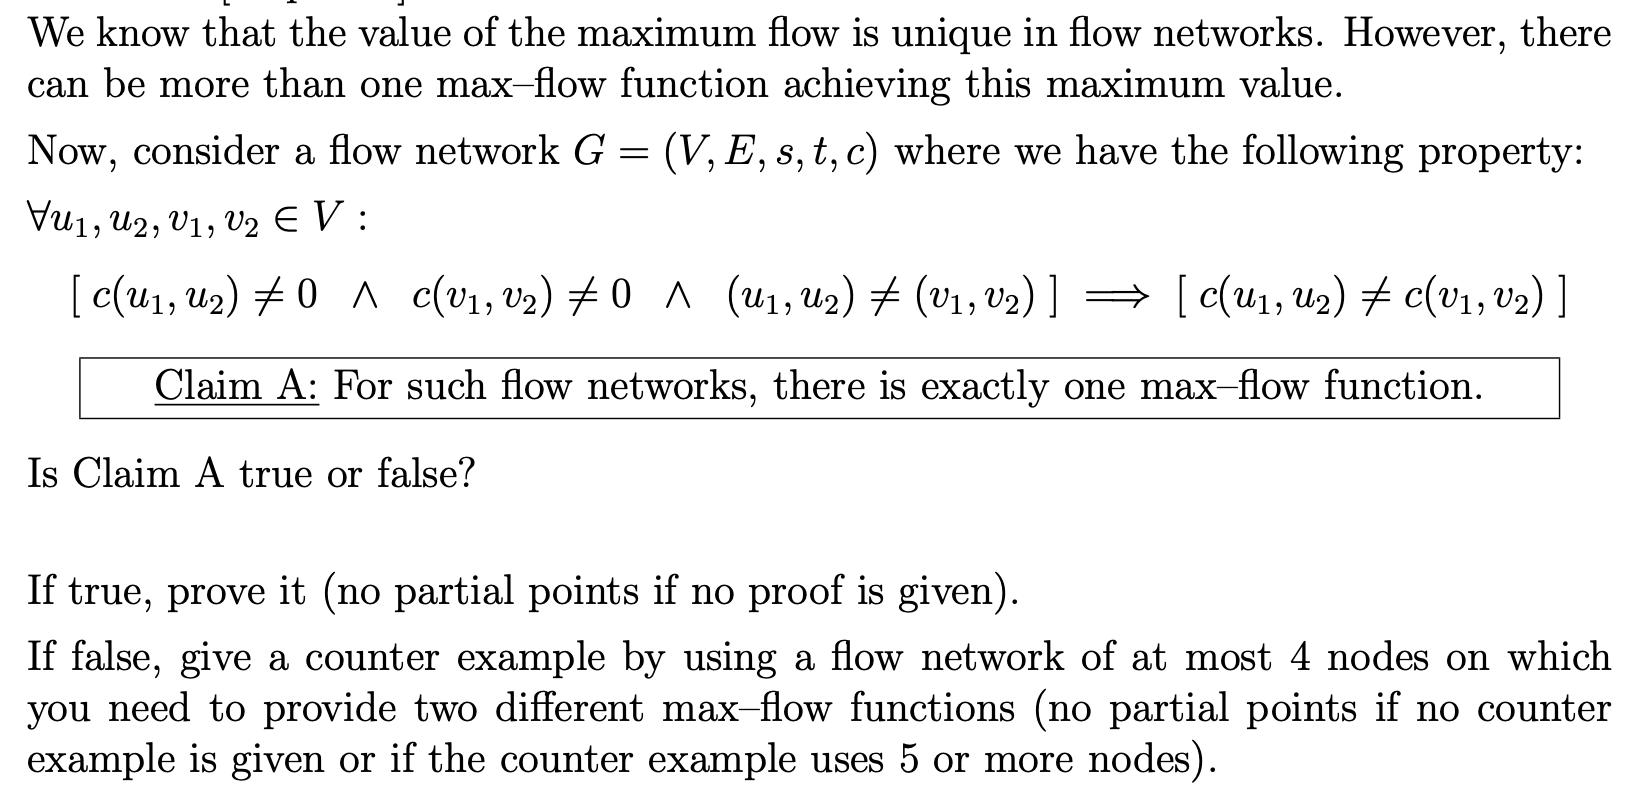 We know that the value of the maximum flow is unique in flow networks. However, there can be more than one max-flow function